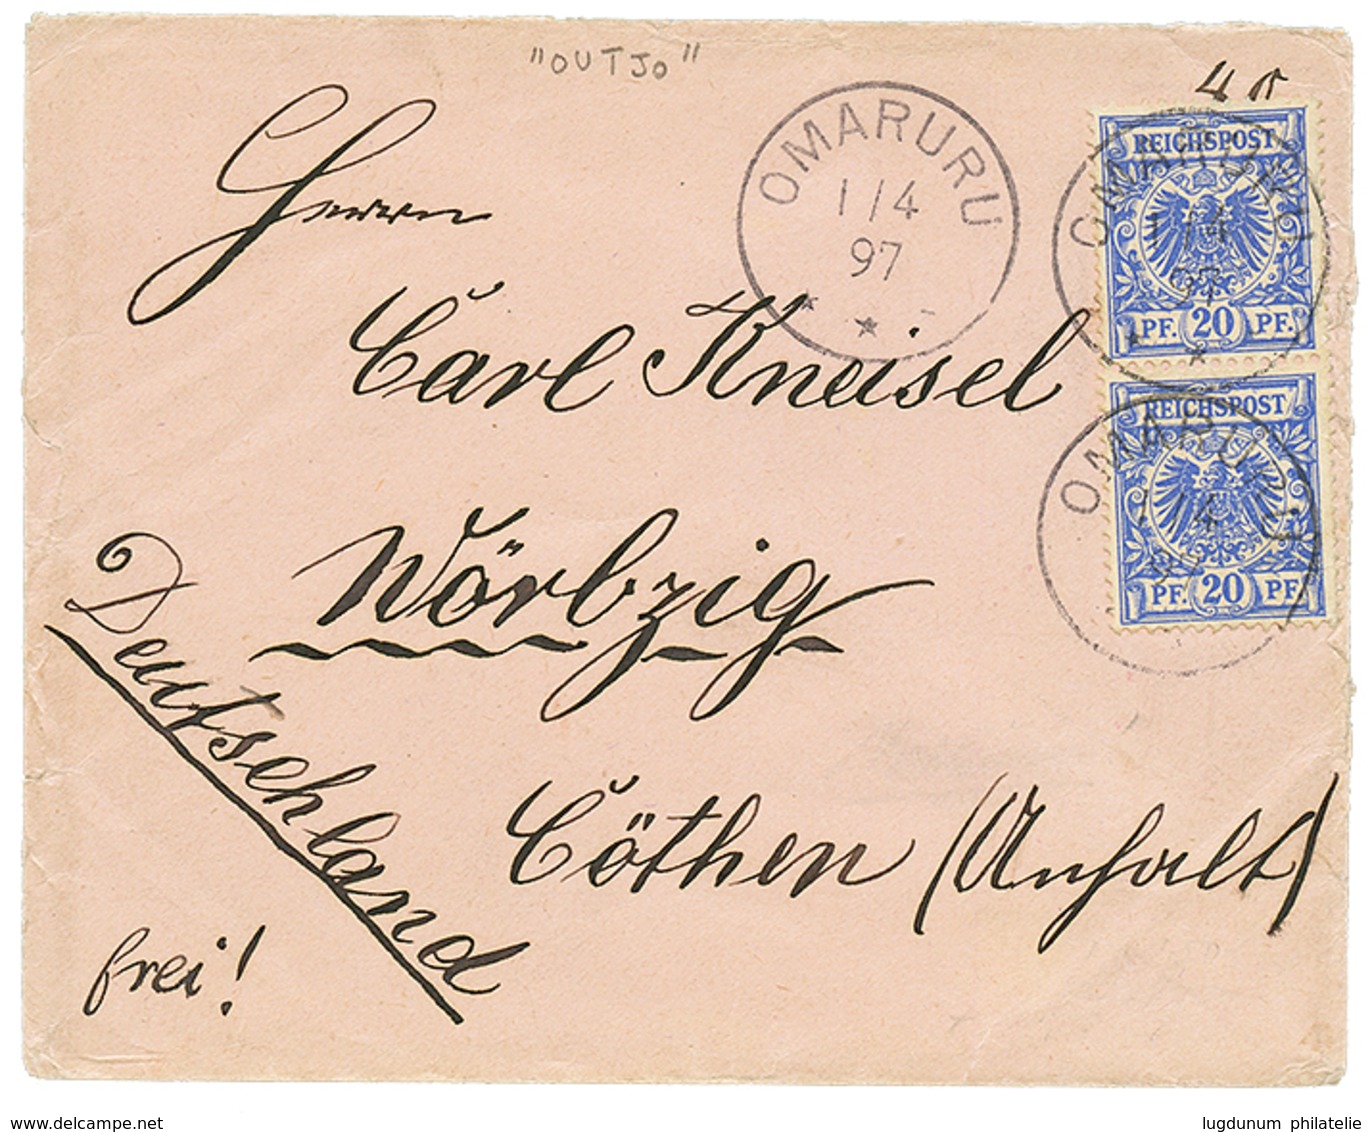 1076 "OUTJO Precursor" : 1897 VORLAUFER 20pf(x2) Canc. OMARURU On Envelope From OUTJO To GERMANY. The Post Office Of OUT - Sud-Ouest Africain Allemand